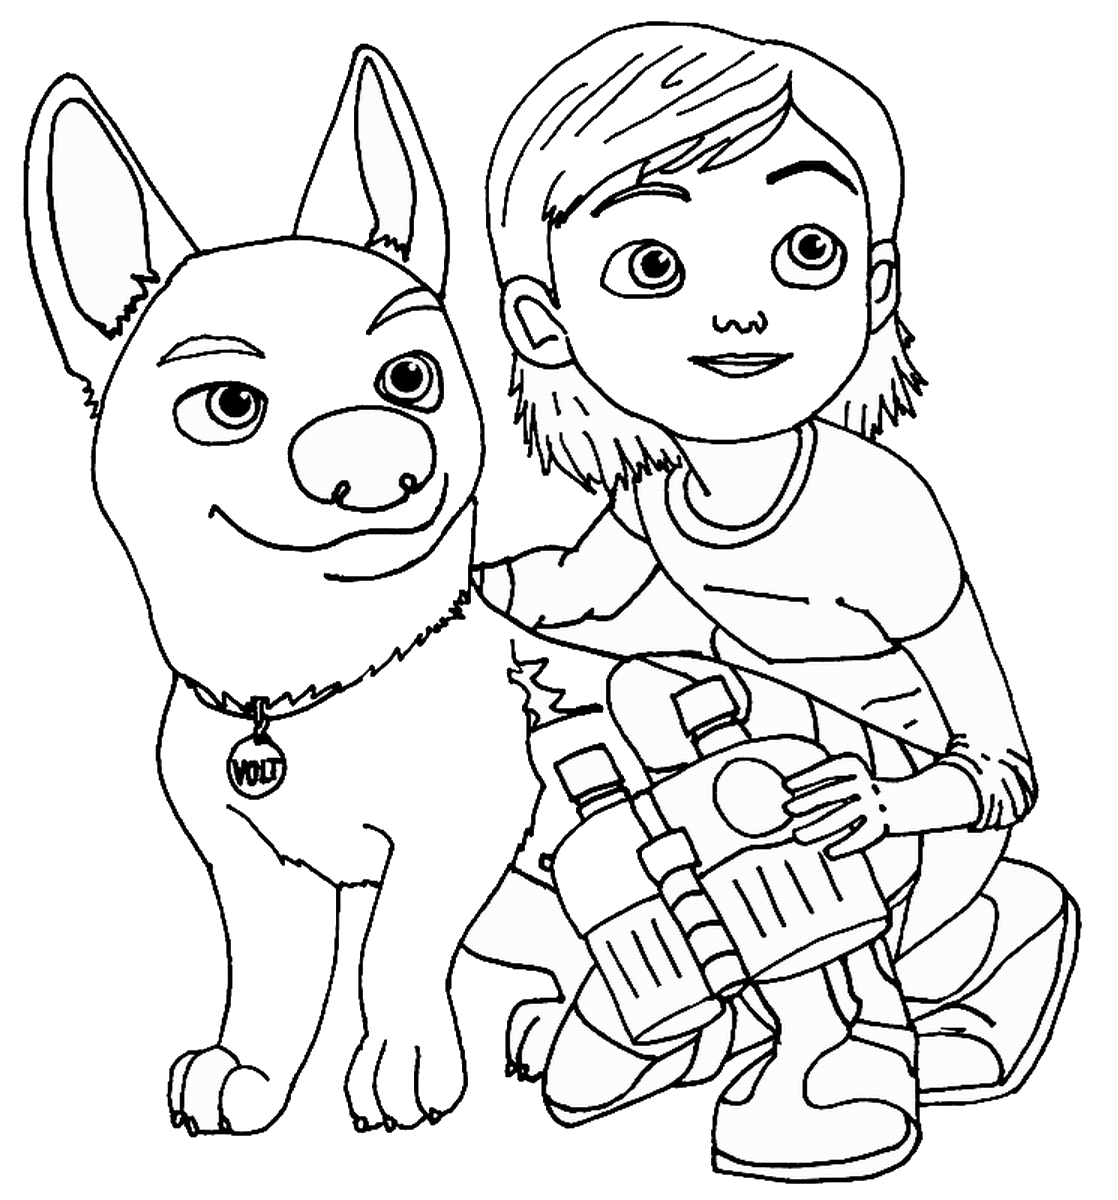 Scary Dog With Sharp Teeth Coloring Page - Free Printable Coloring